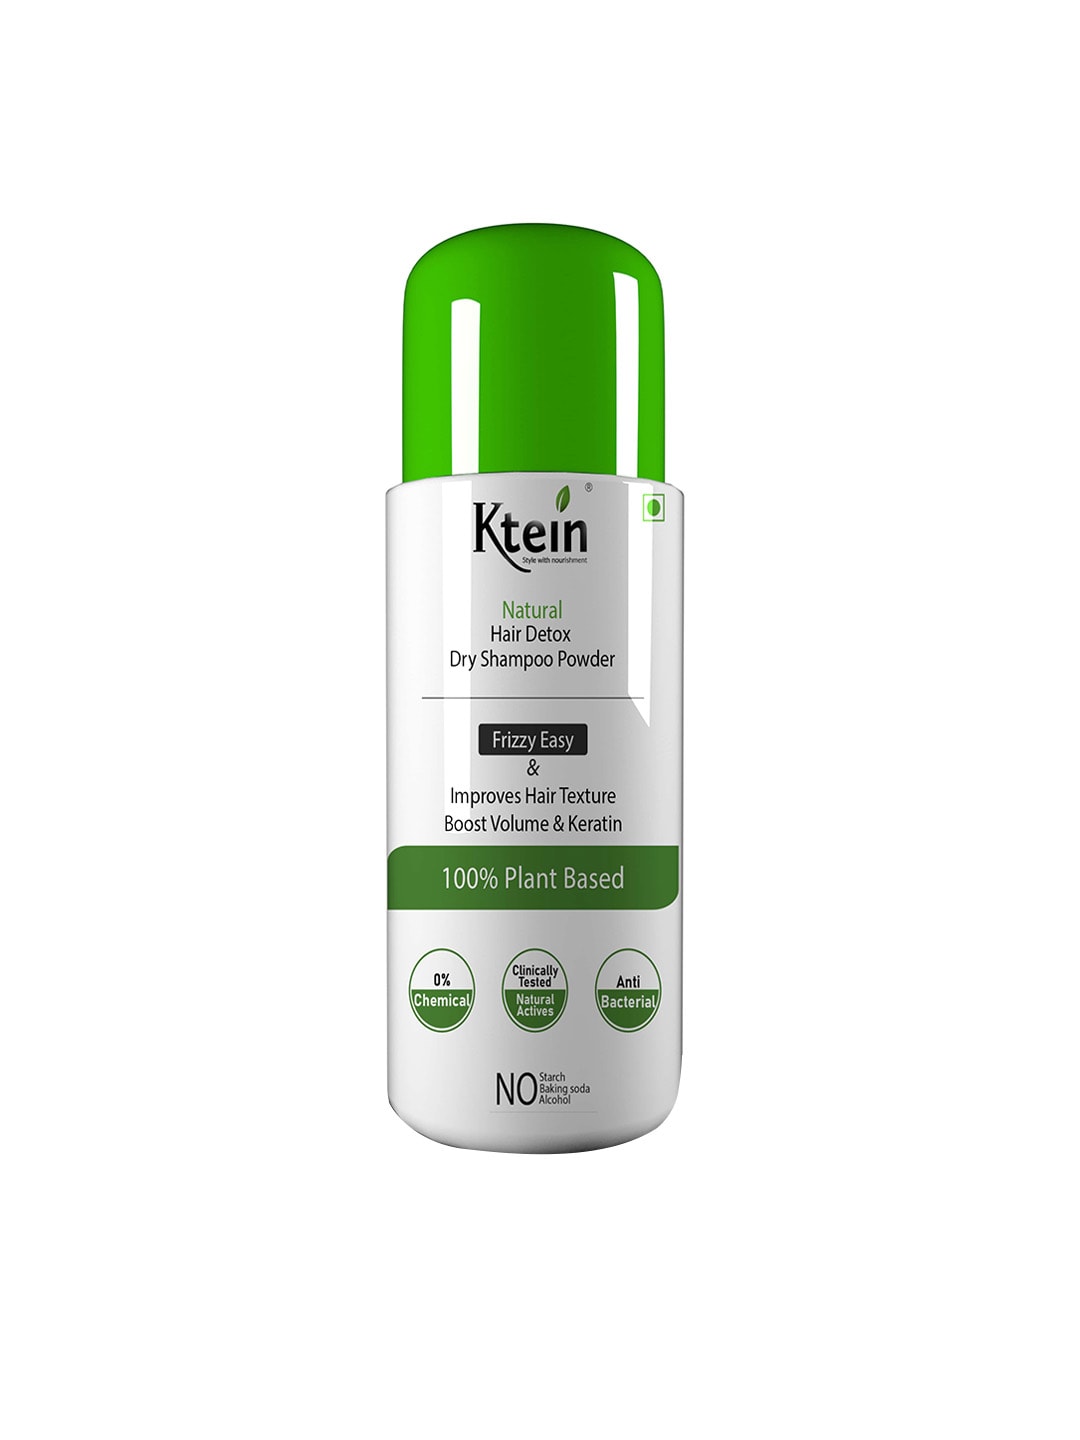 Ktein Natural Hair Detox Dry Shampo Price in India